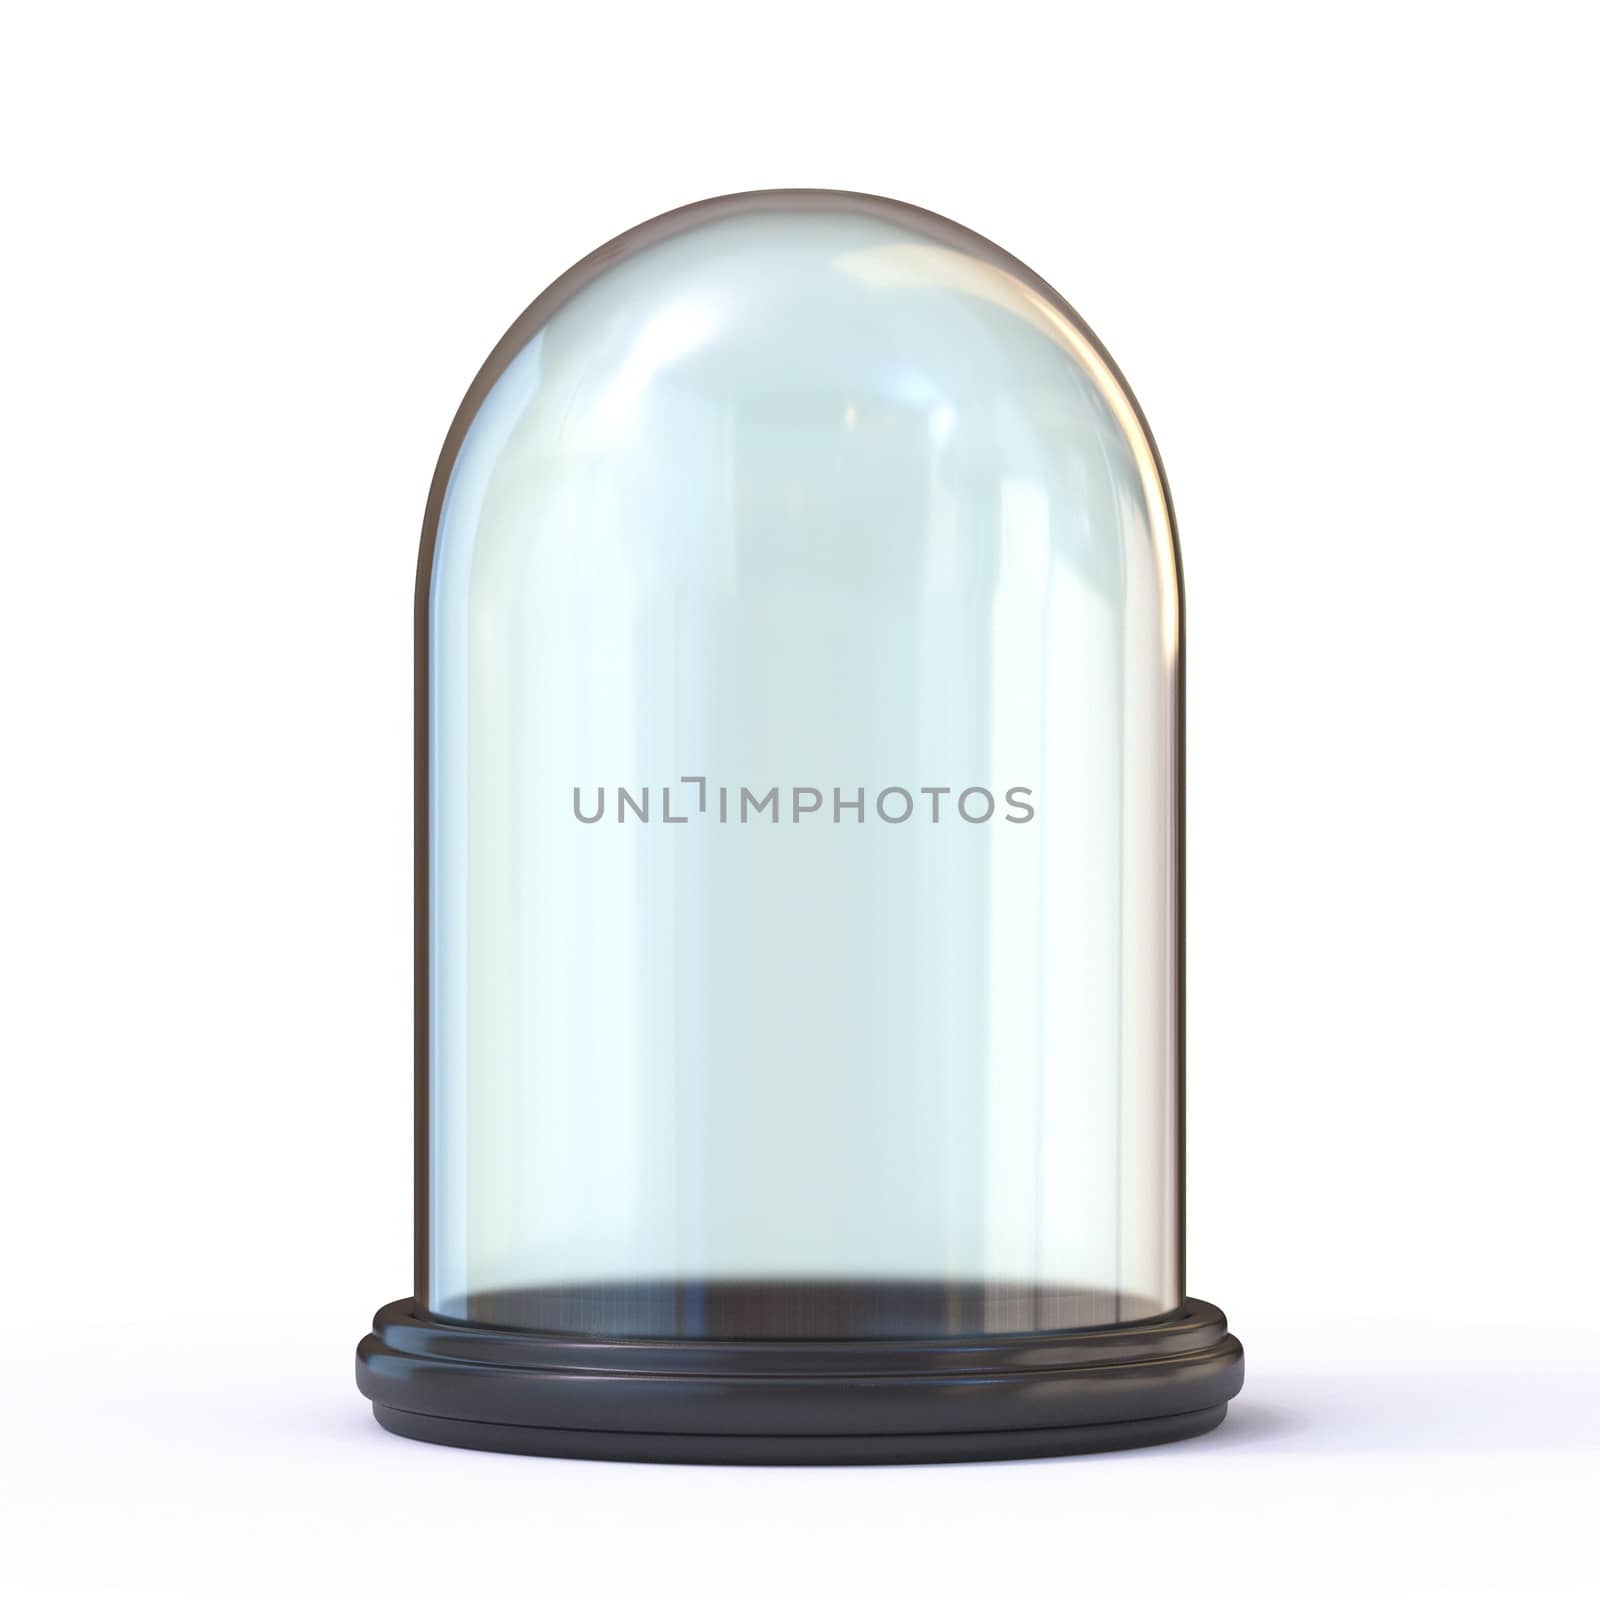 Empty glass dome 3D render illustration isolated on white background